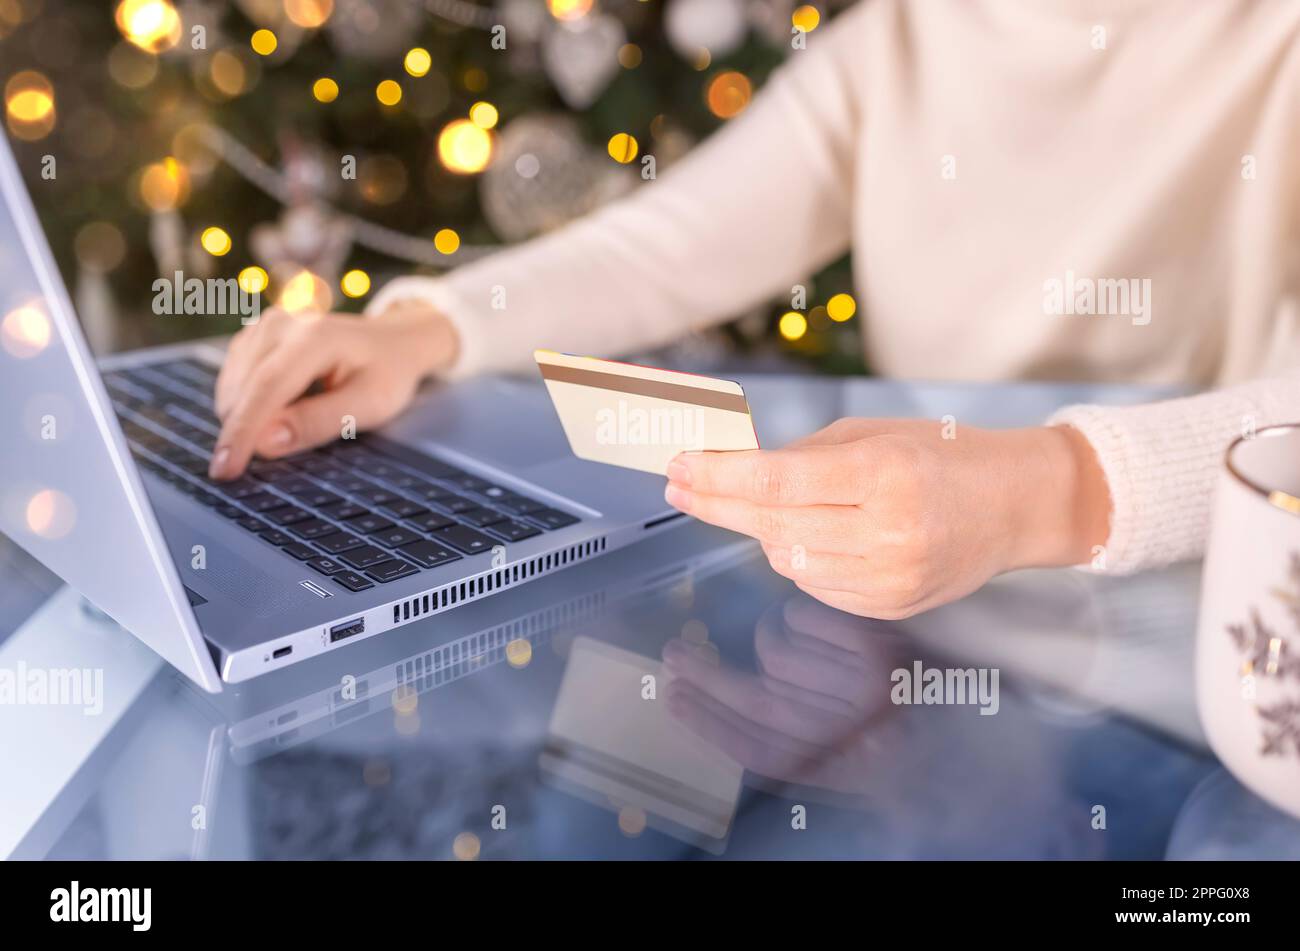 Woman shopping online with laptop at christmas at home in the living room Stock Photo